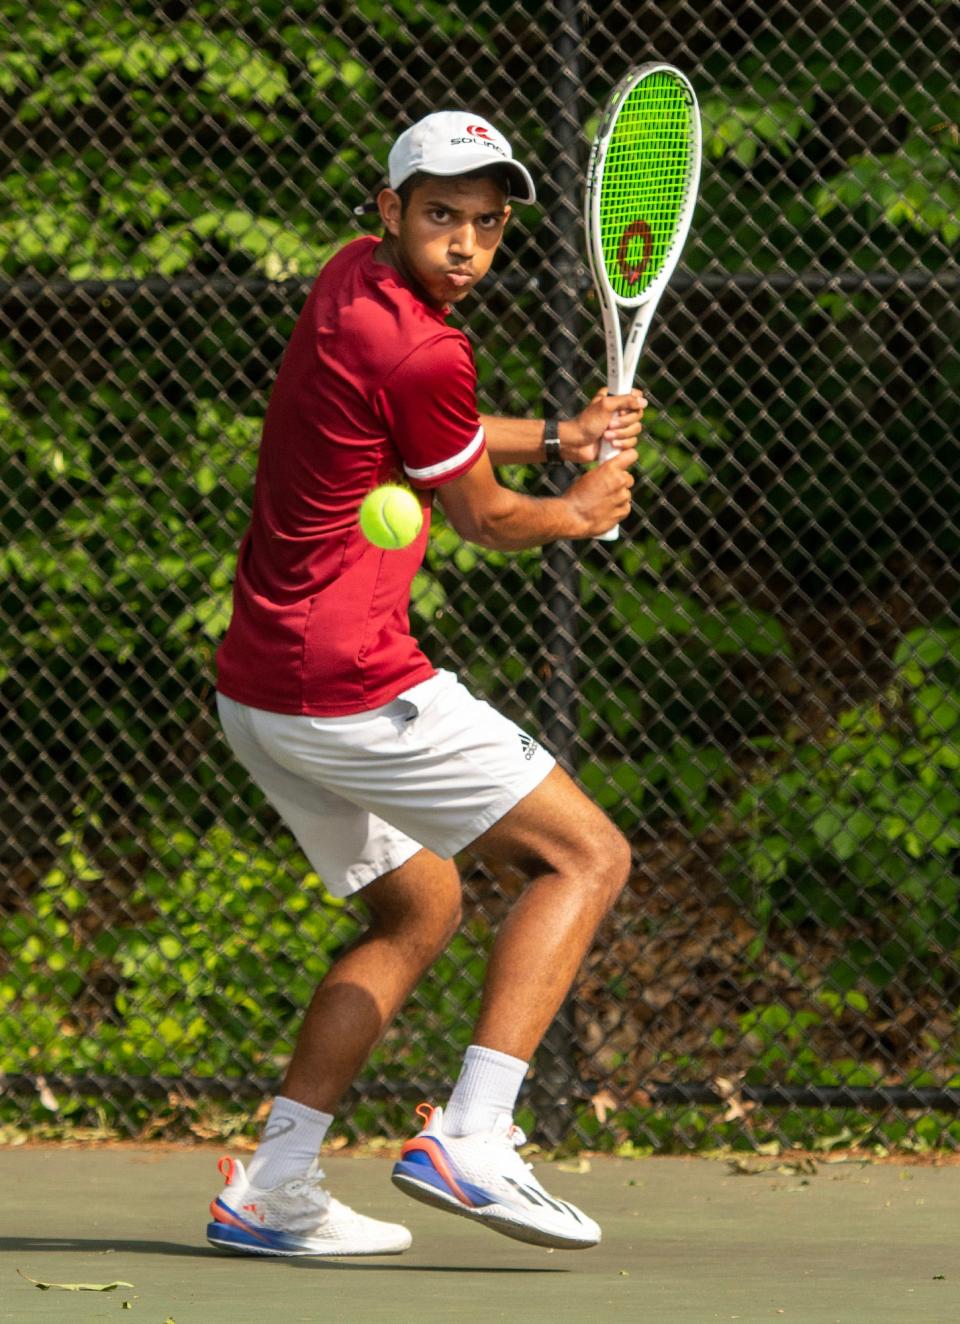 Westborough's Srinjoy Ghosh returns the ball against his Concord-Carlisle opponent during the division two boys' tennis semifinal at Marlborough High School on Monday.